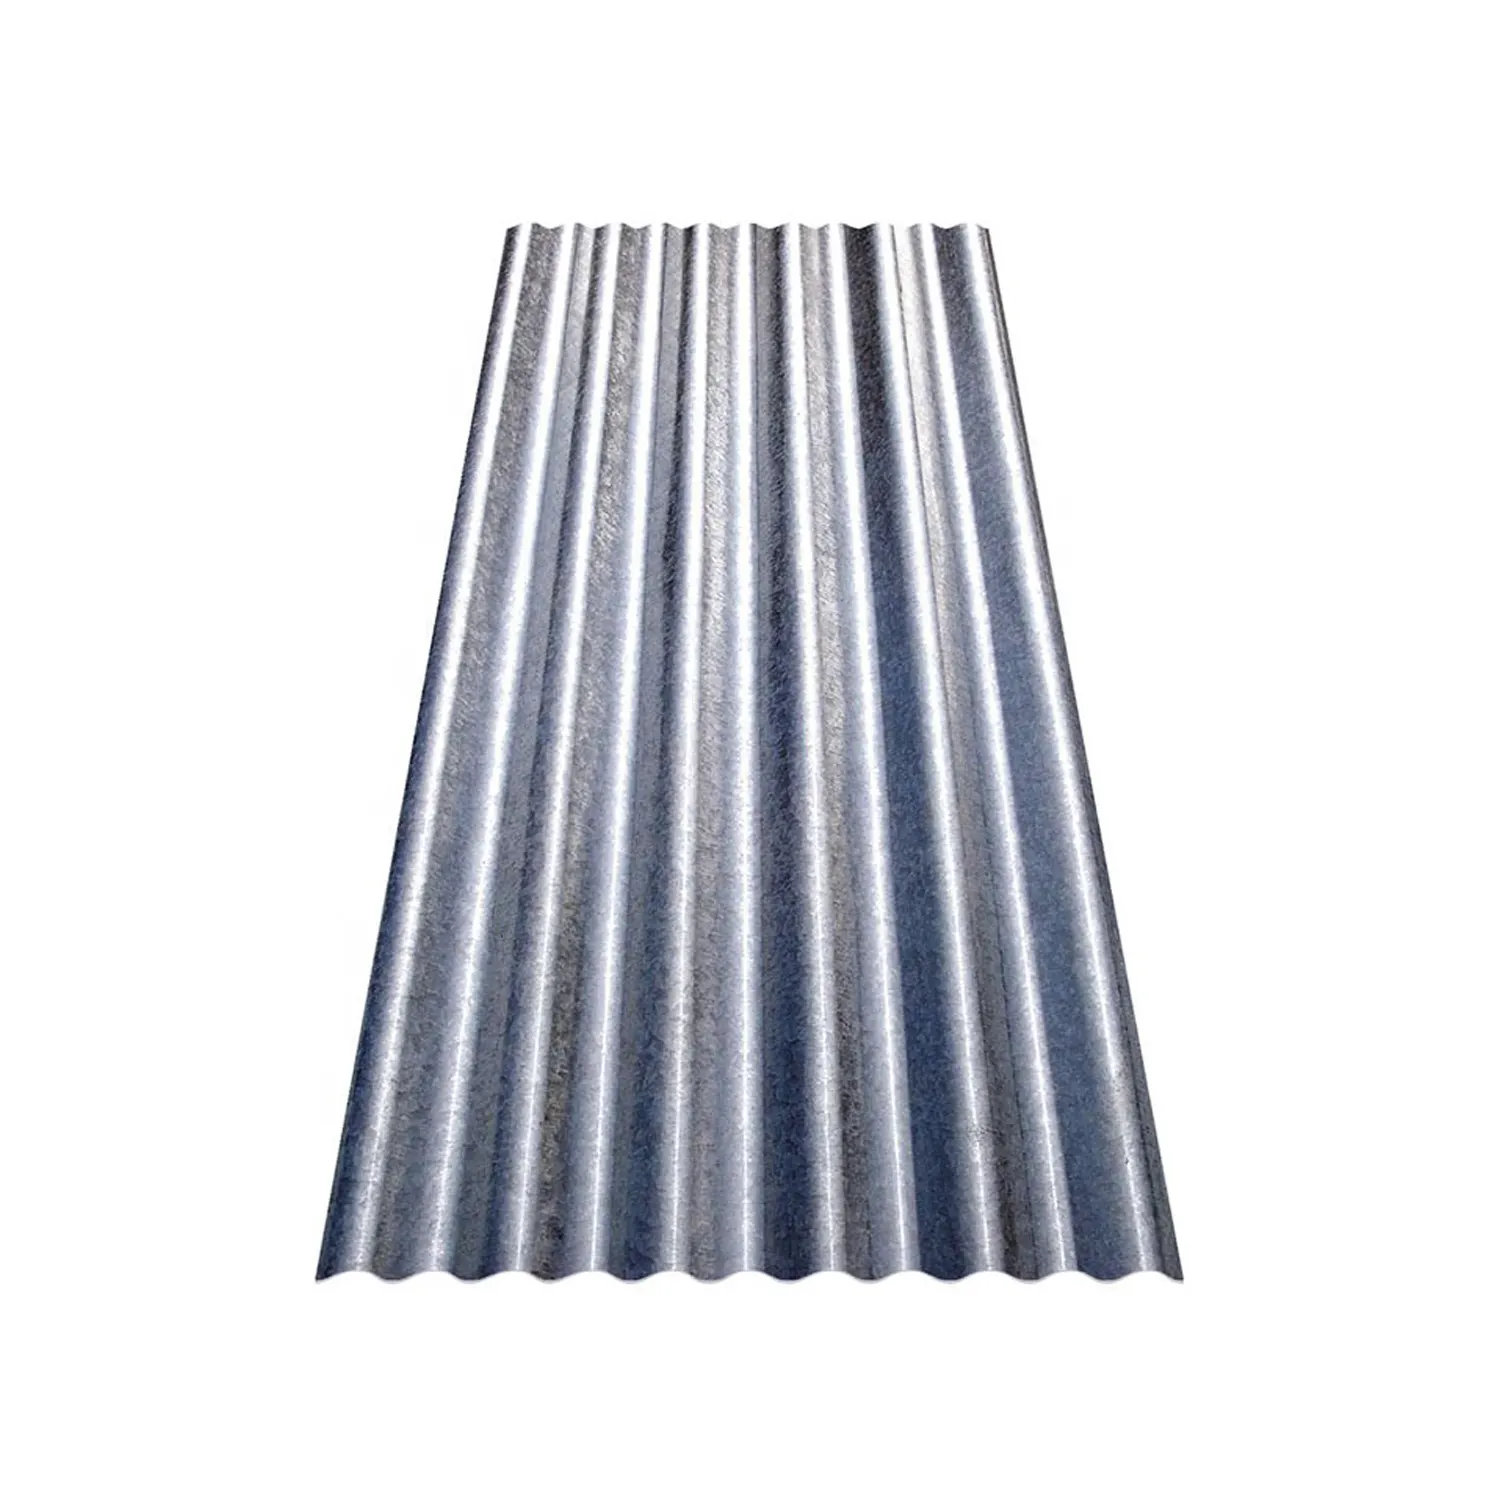 Hot sale Z50 Z275 Galvanized Corrugated Roofing Sheets color coated Iron Roofing Sheet Price Sheet